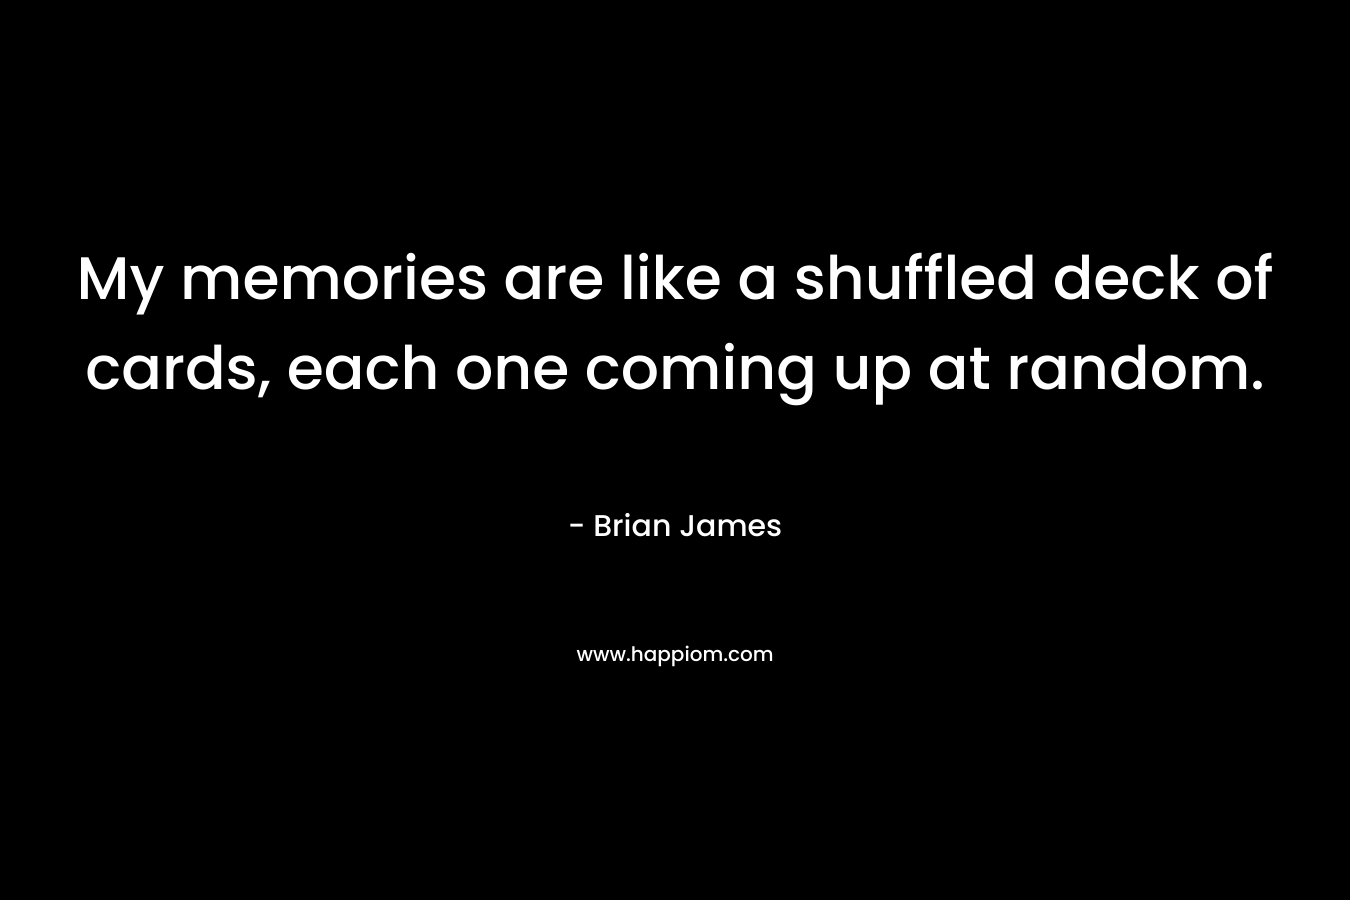 My memories are like a shuffled deck of cards, each one coming up at random. – Brian James